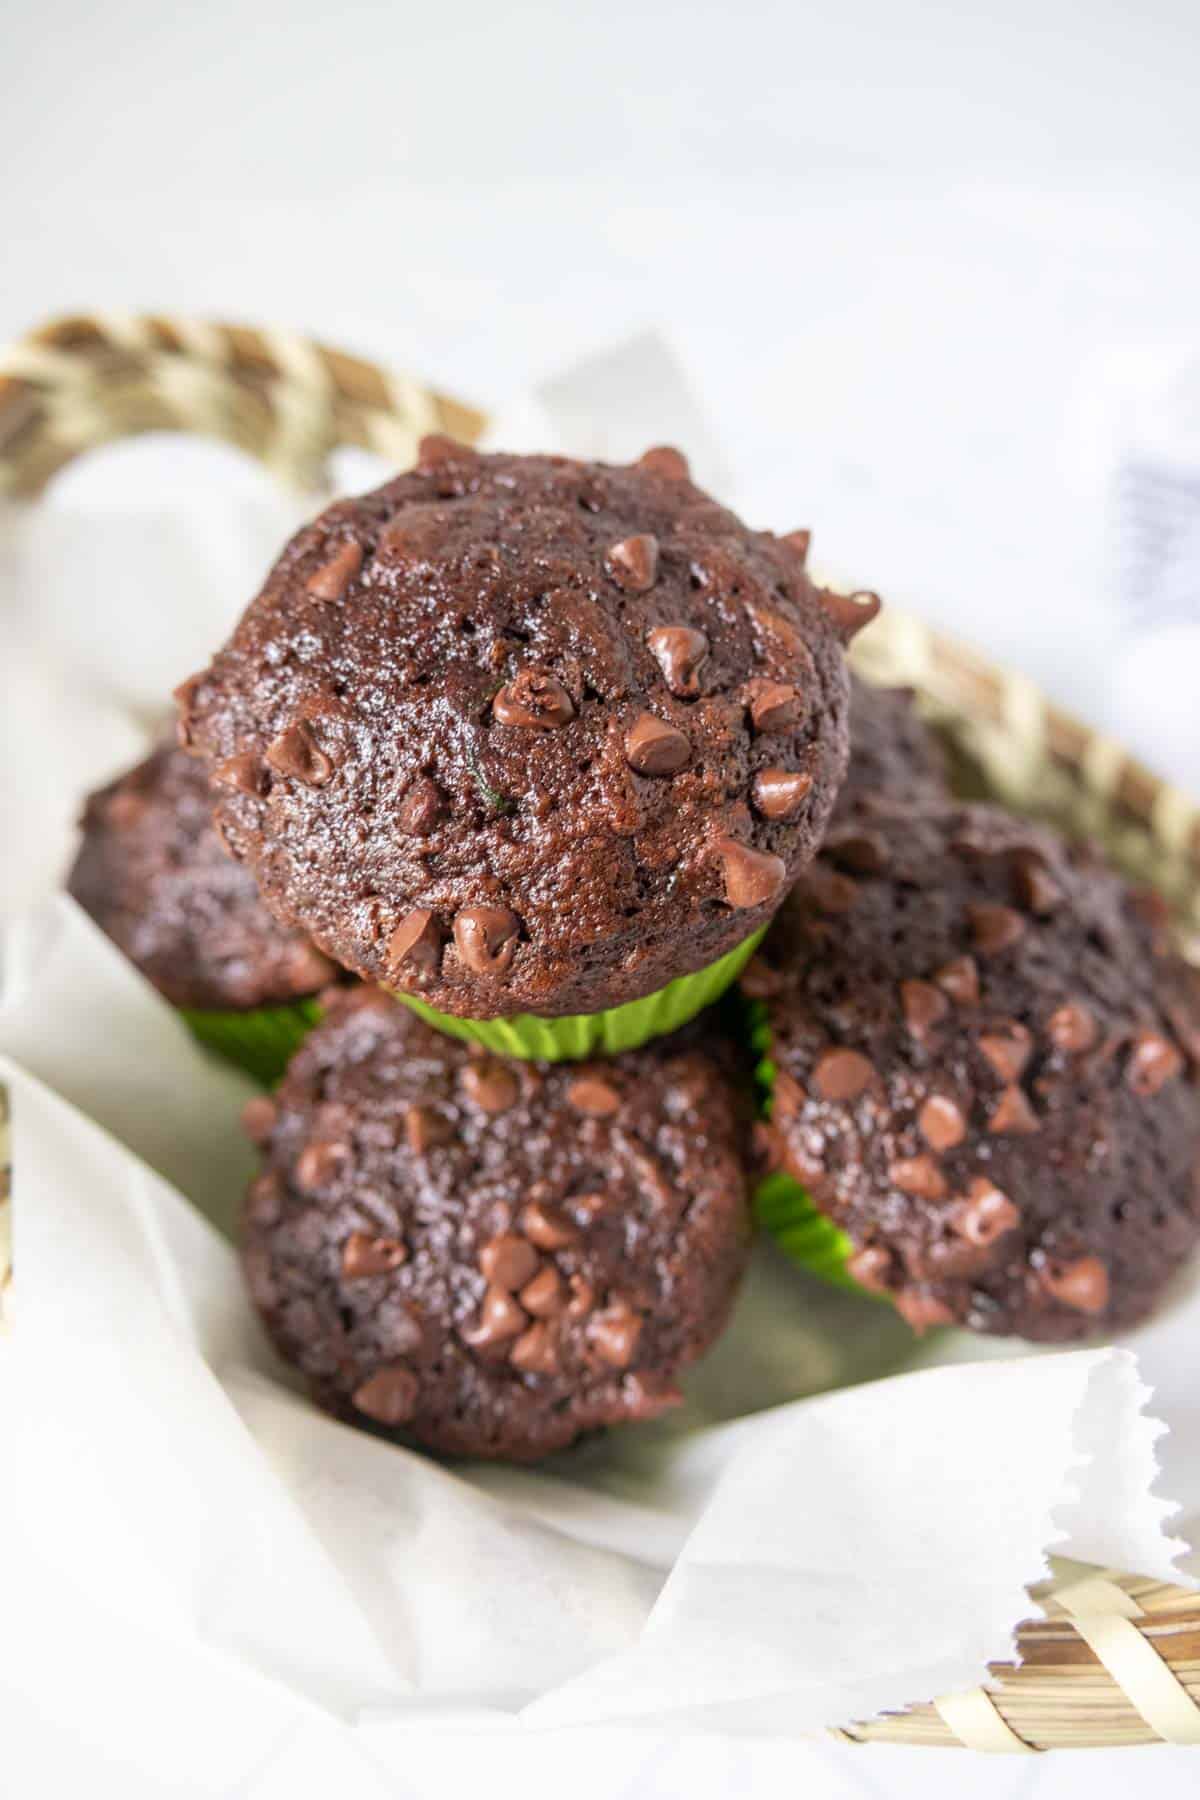 Chocolate zucchini muffins stacked in a basket.